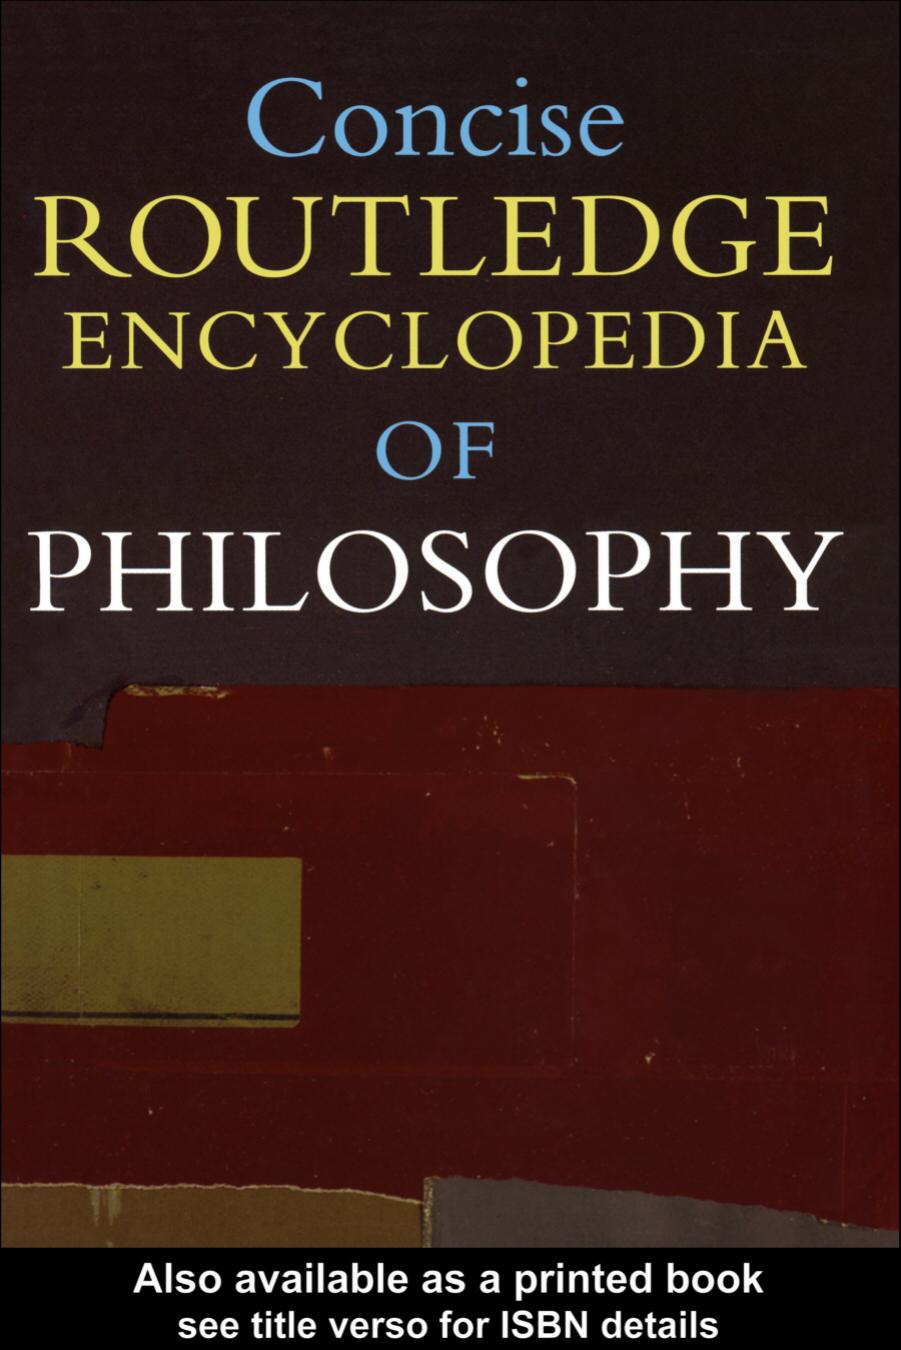 Concise Routledge Encyclopedia of Philosophy